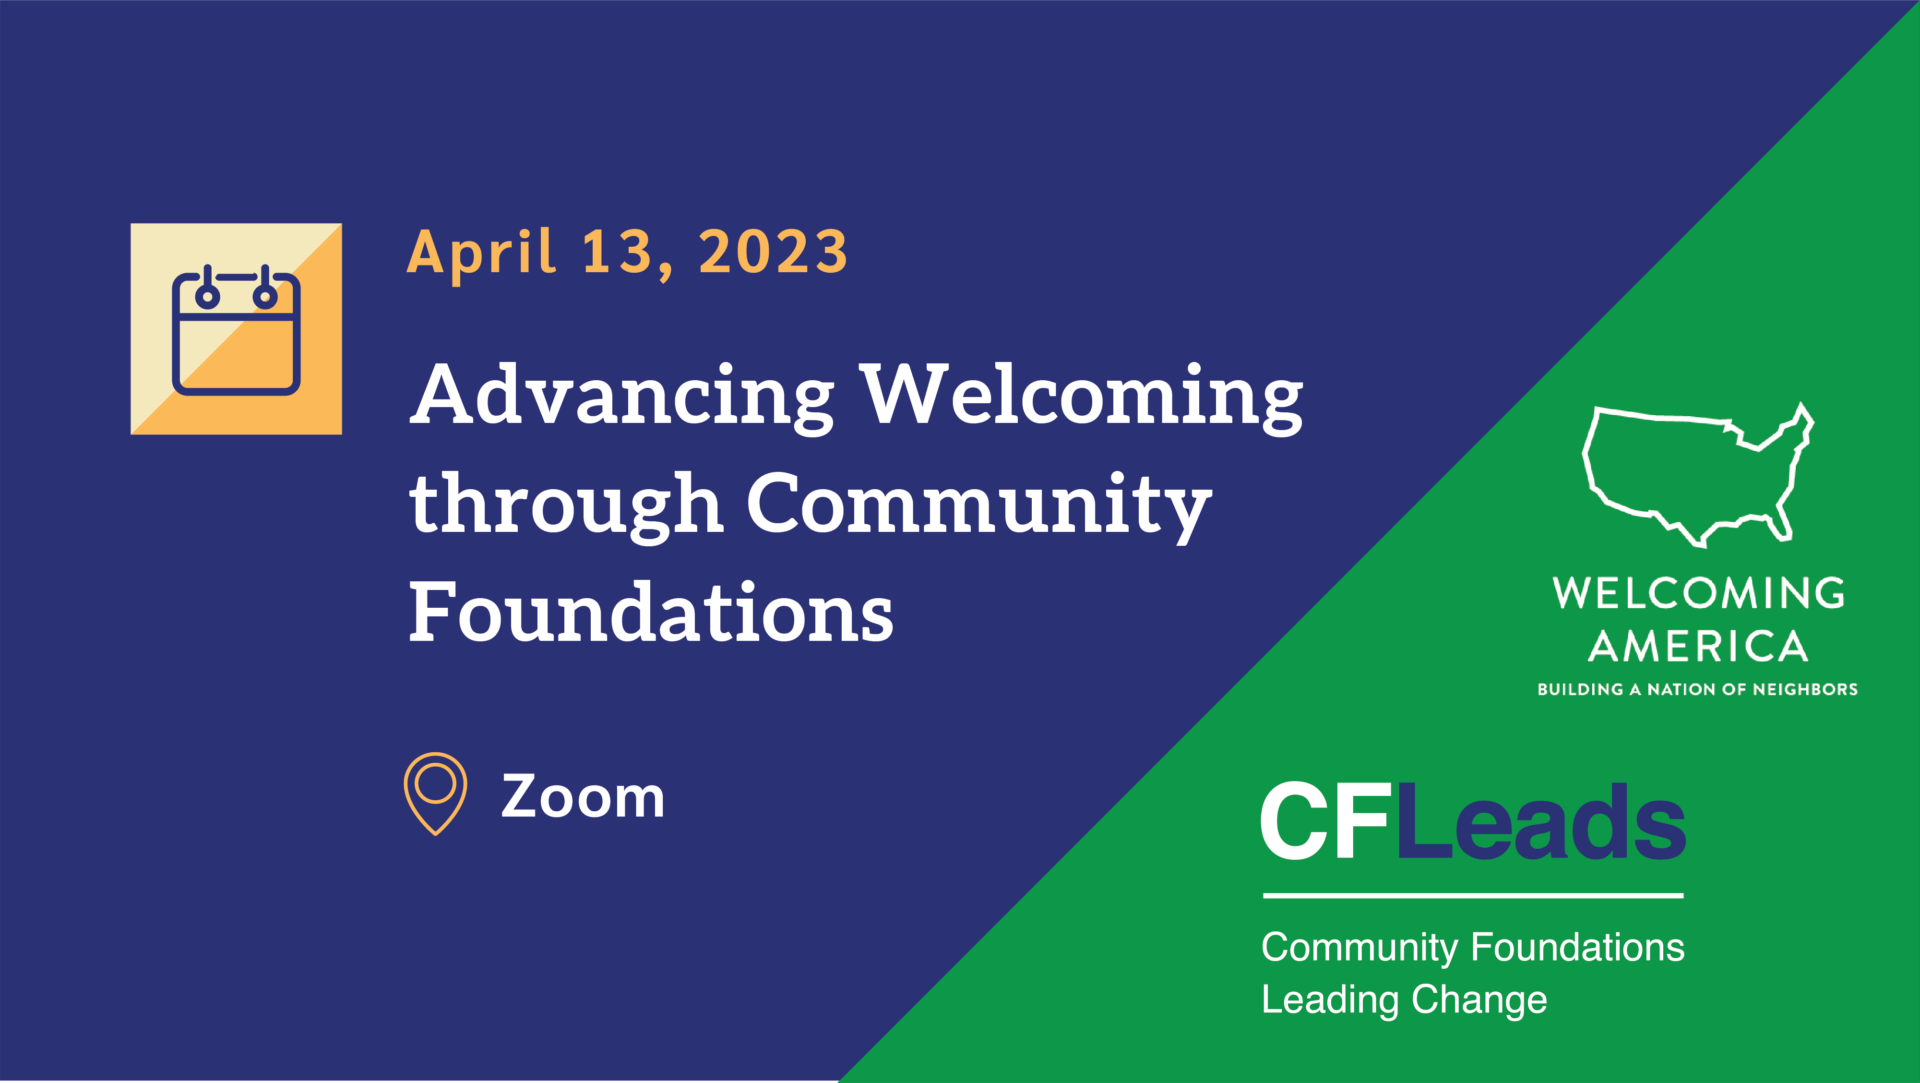 Graphic for event with CFLeads and Welcoming America logos.